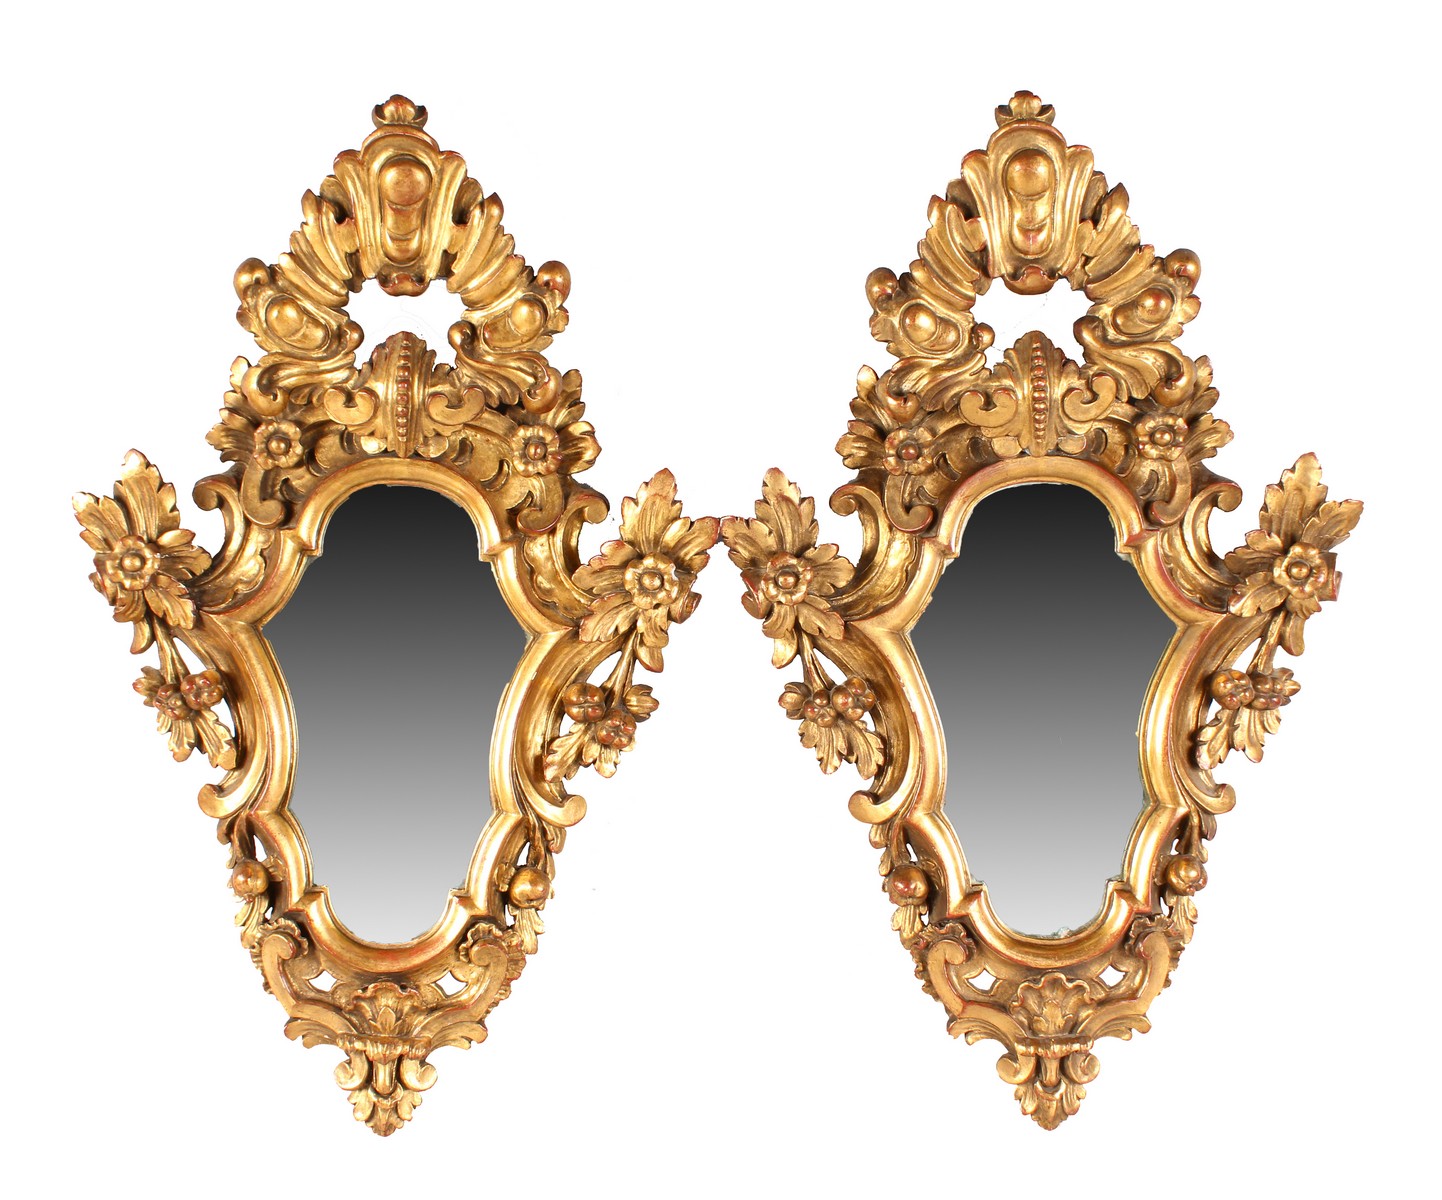 A PAIR OF ITALIAN SHAPED AND CARVED GILTWOOD MIRRORS with acanthus and flower heads. 2ft 5ins long.